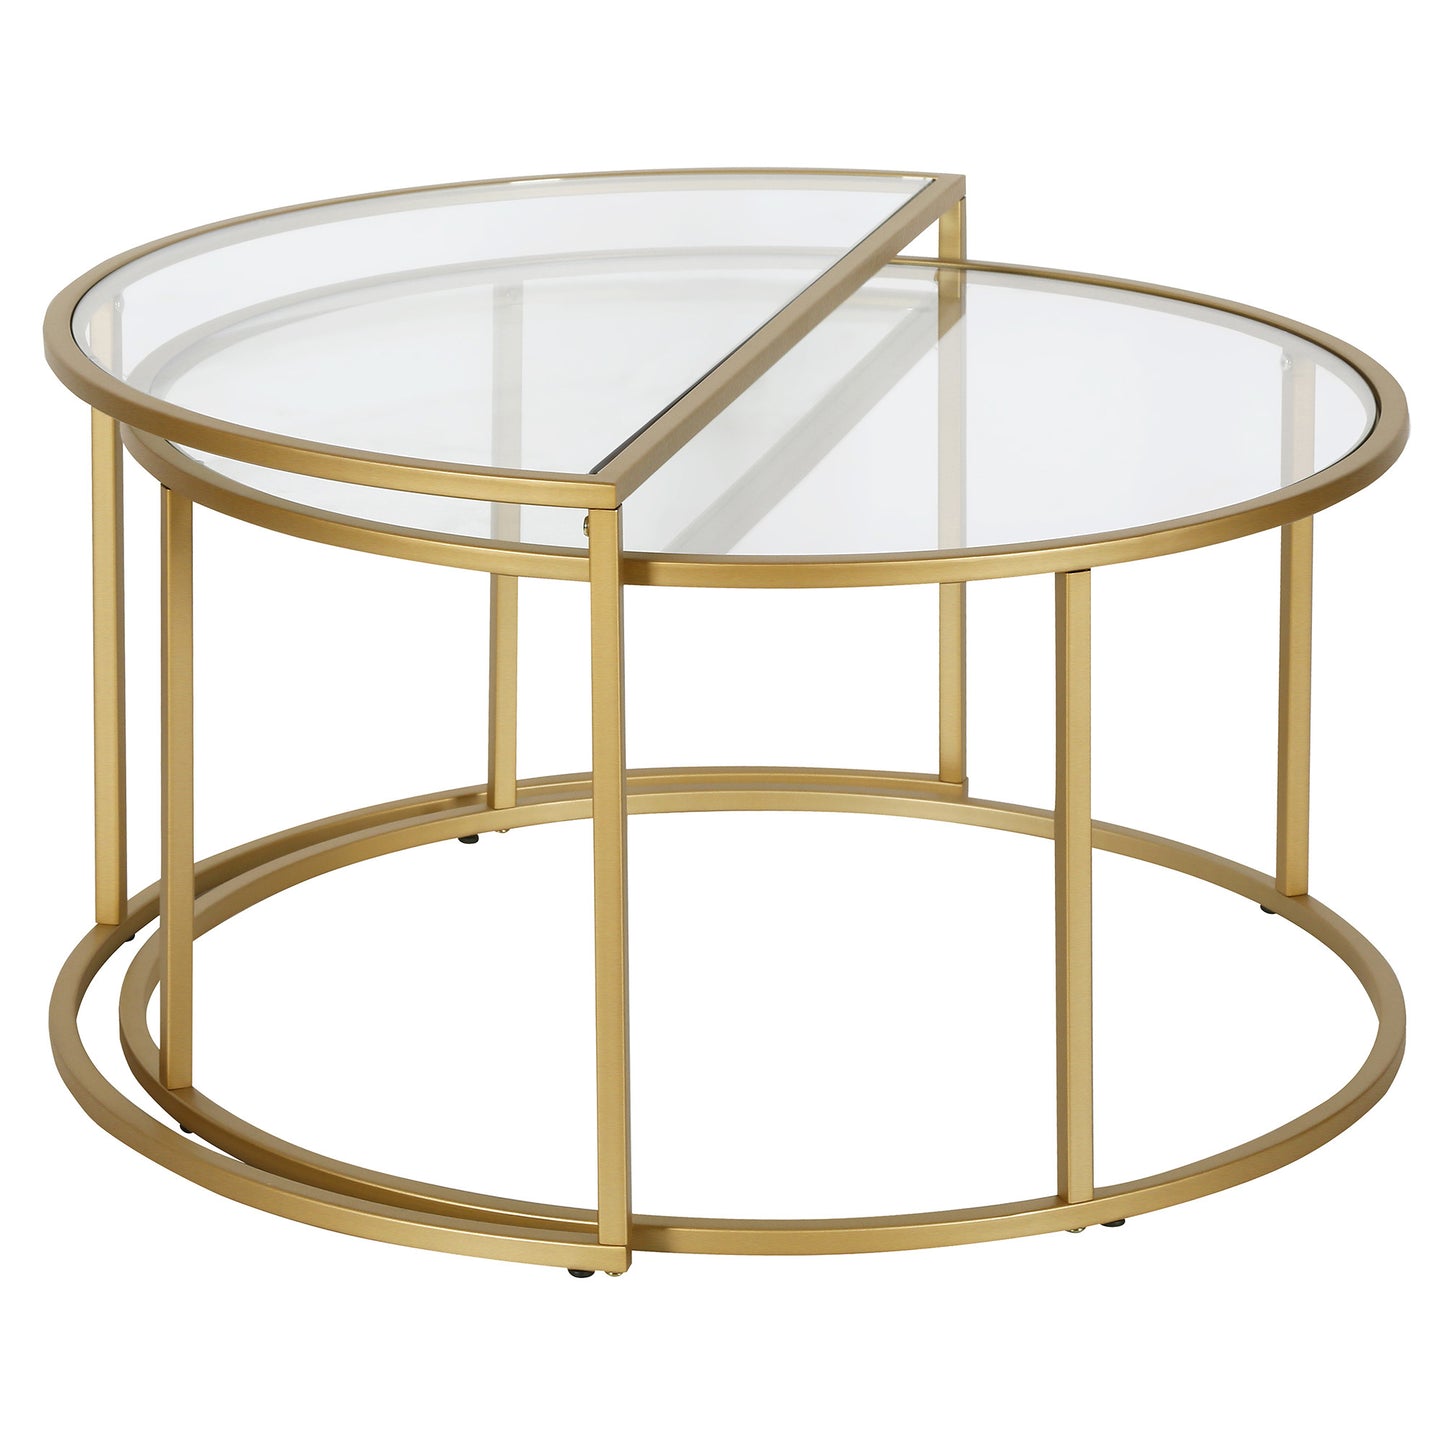 Set of Two 33" Gold Glass And Steel Half Circle Nested Coffee Tables